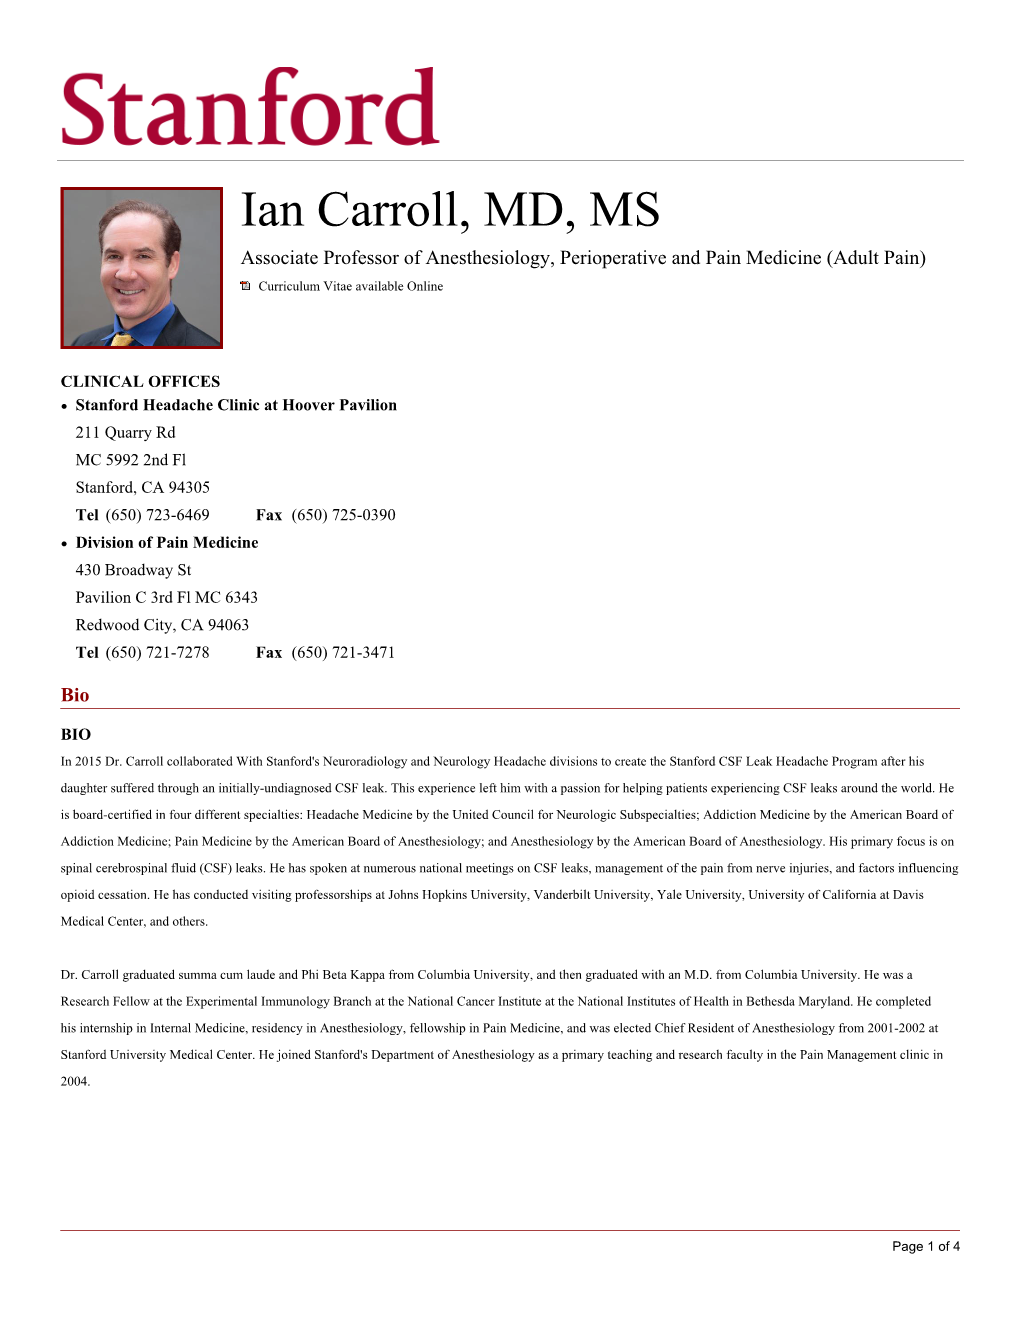 Ian Carroll, MD, MS Associate Professor of Anesthesiology, Perioperative and Pain Medicine (Adult Pain) Curriculum Vitae Available Online